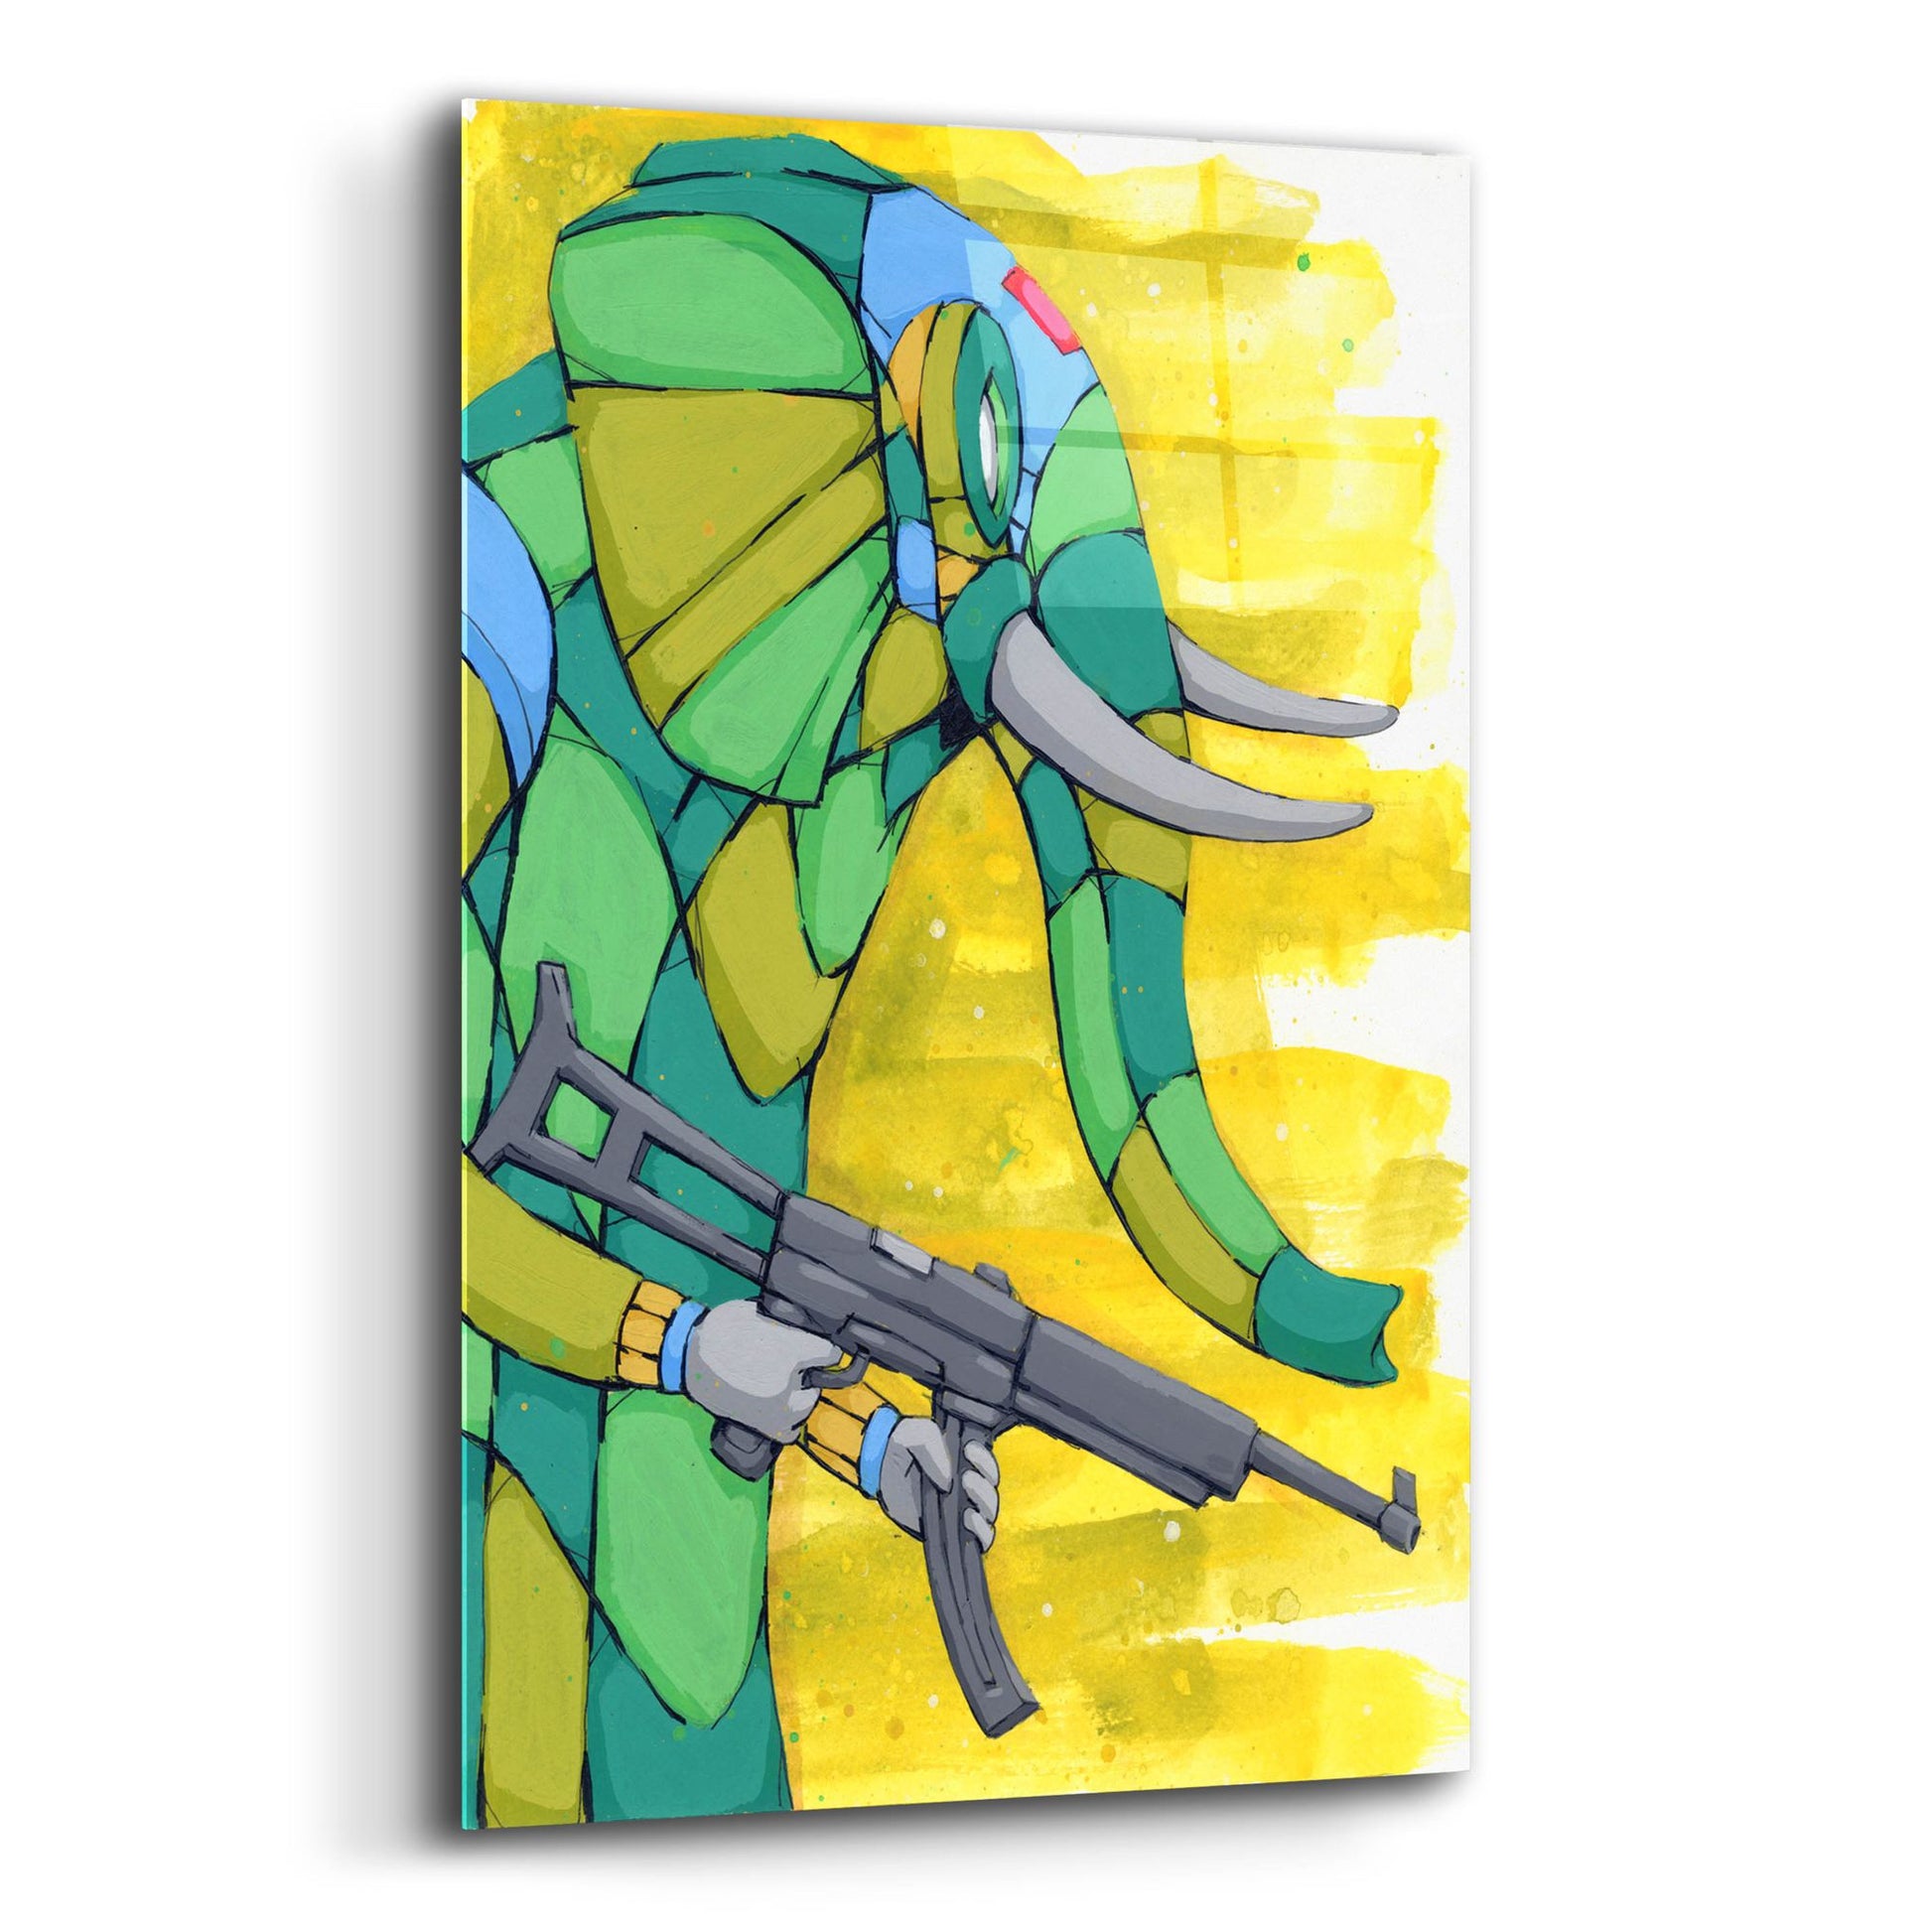 Epic Art 'Protecting his Ivory' by Ric Stultz, Acrylic Glass Wall Art,12x16